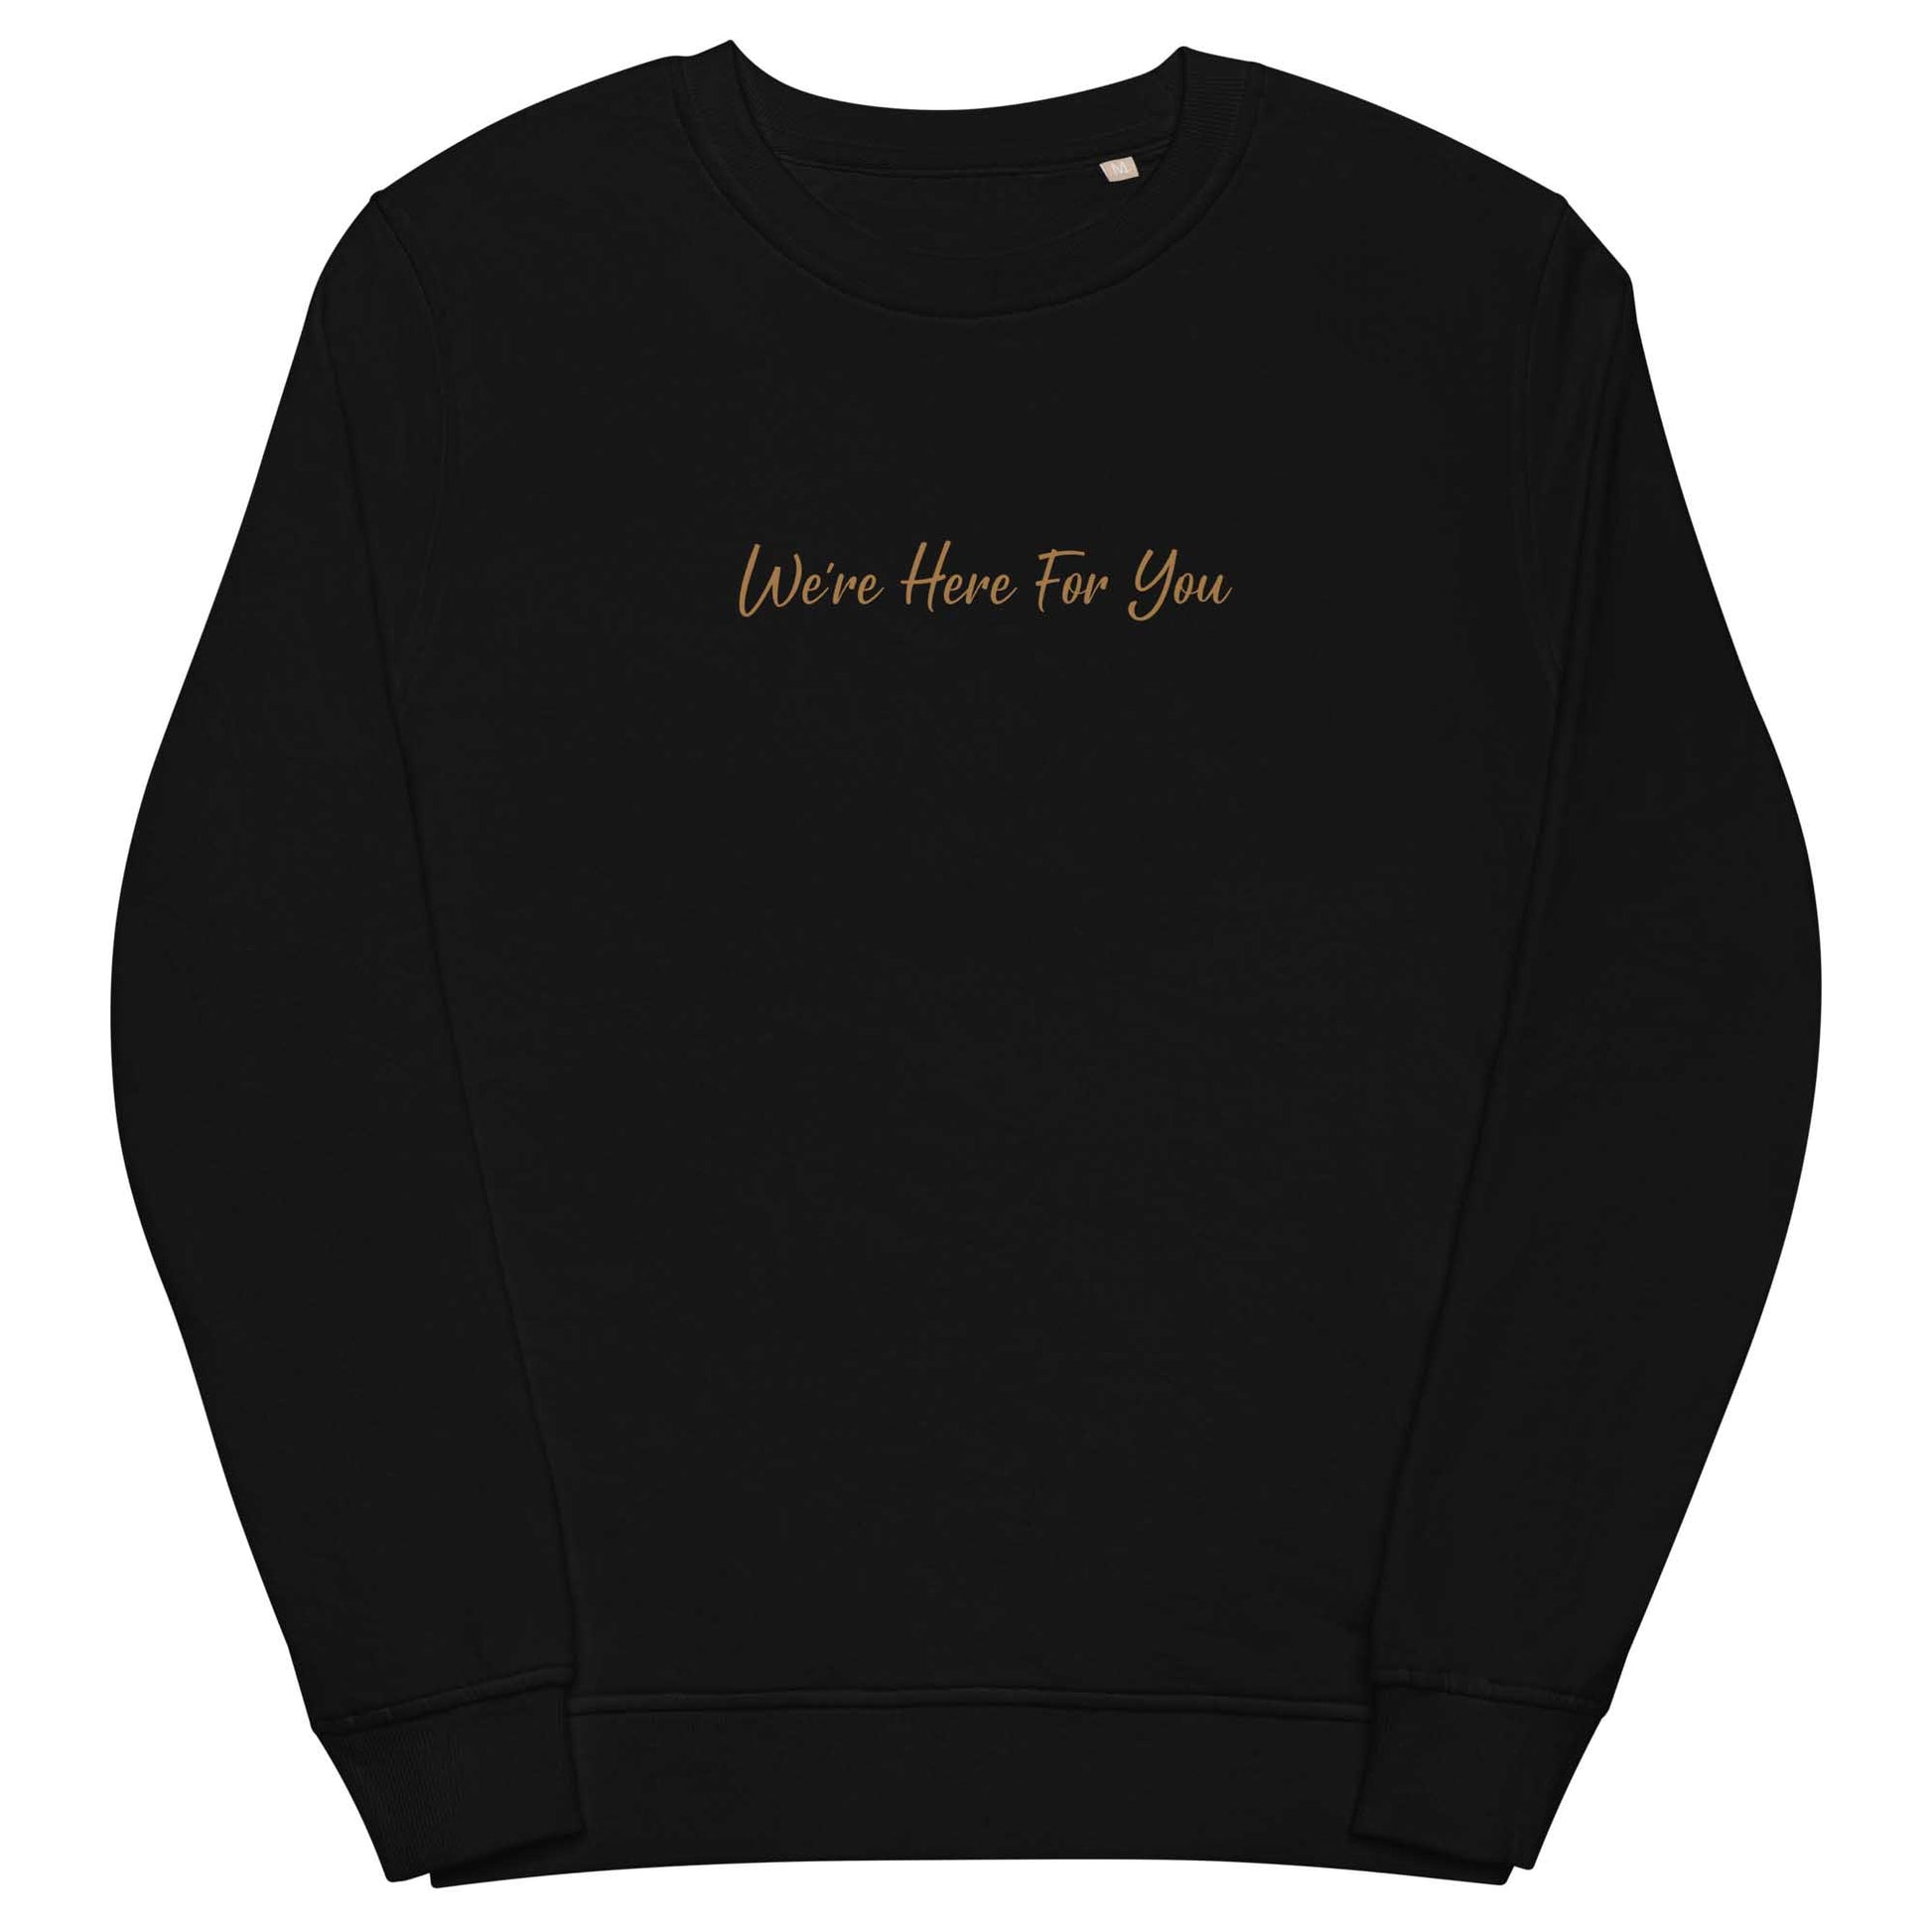 Men black positive sweatshirt with inspirational quote, "We Are Here For You."